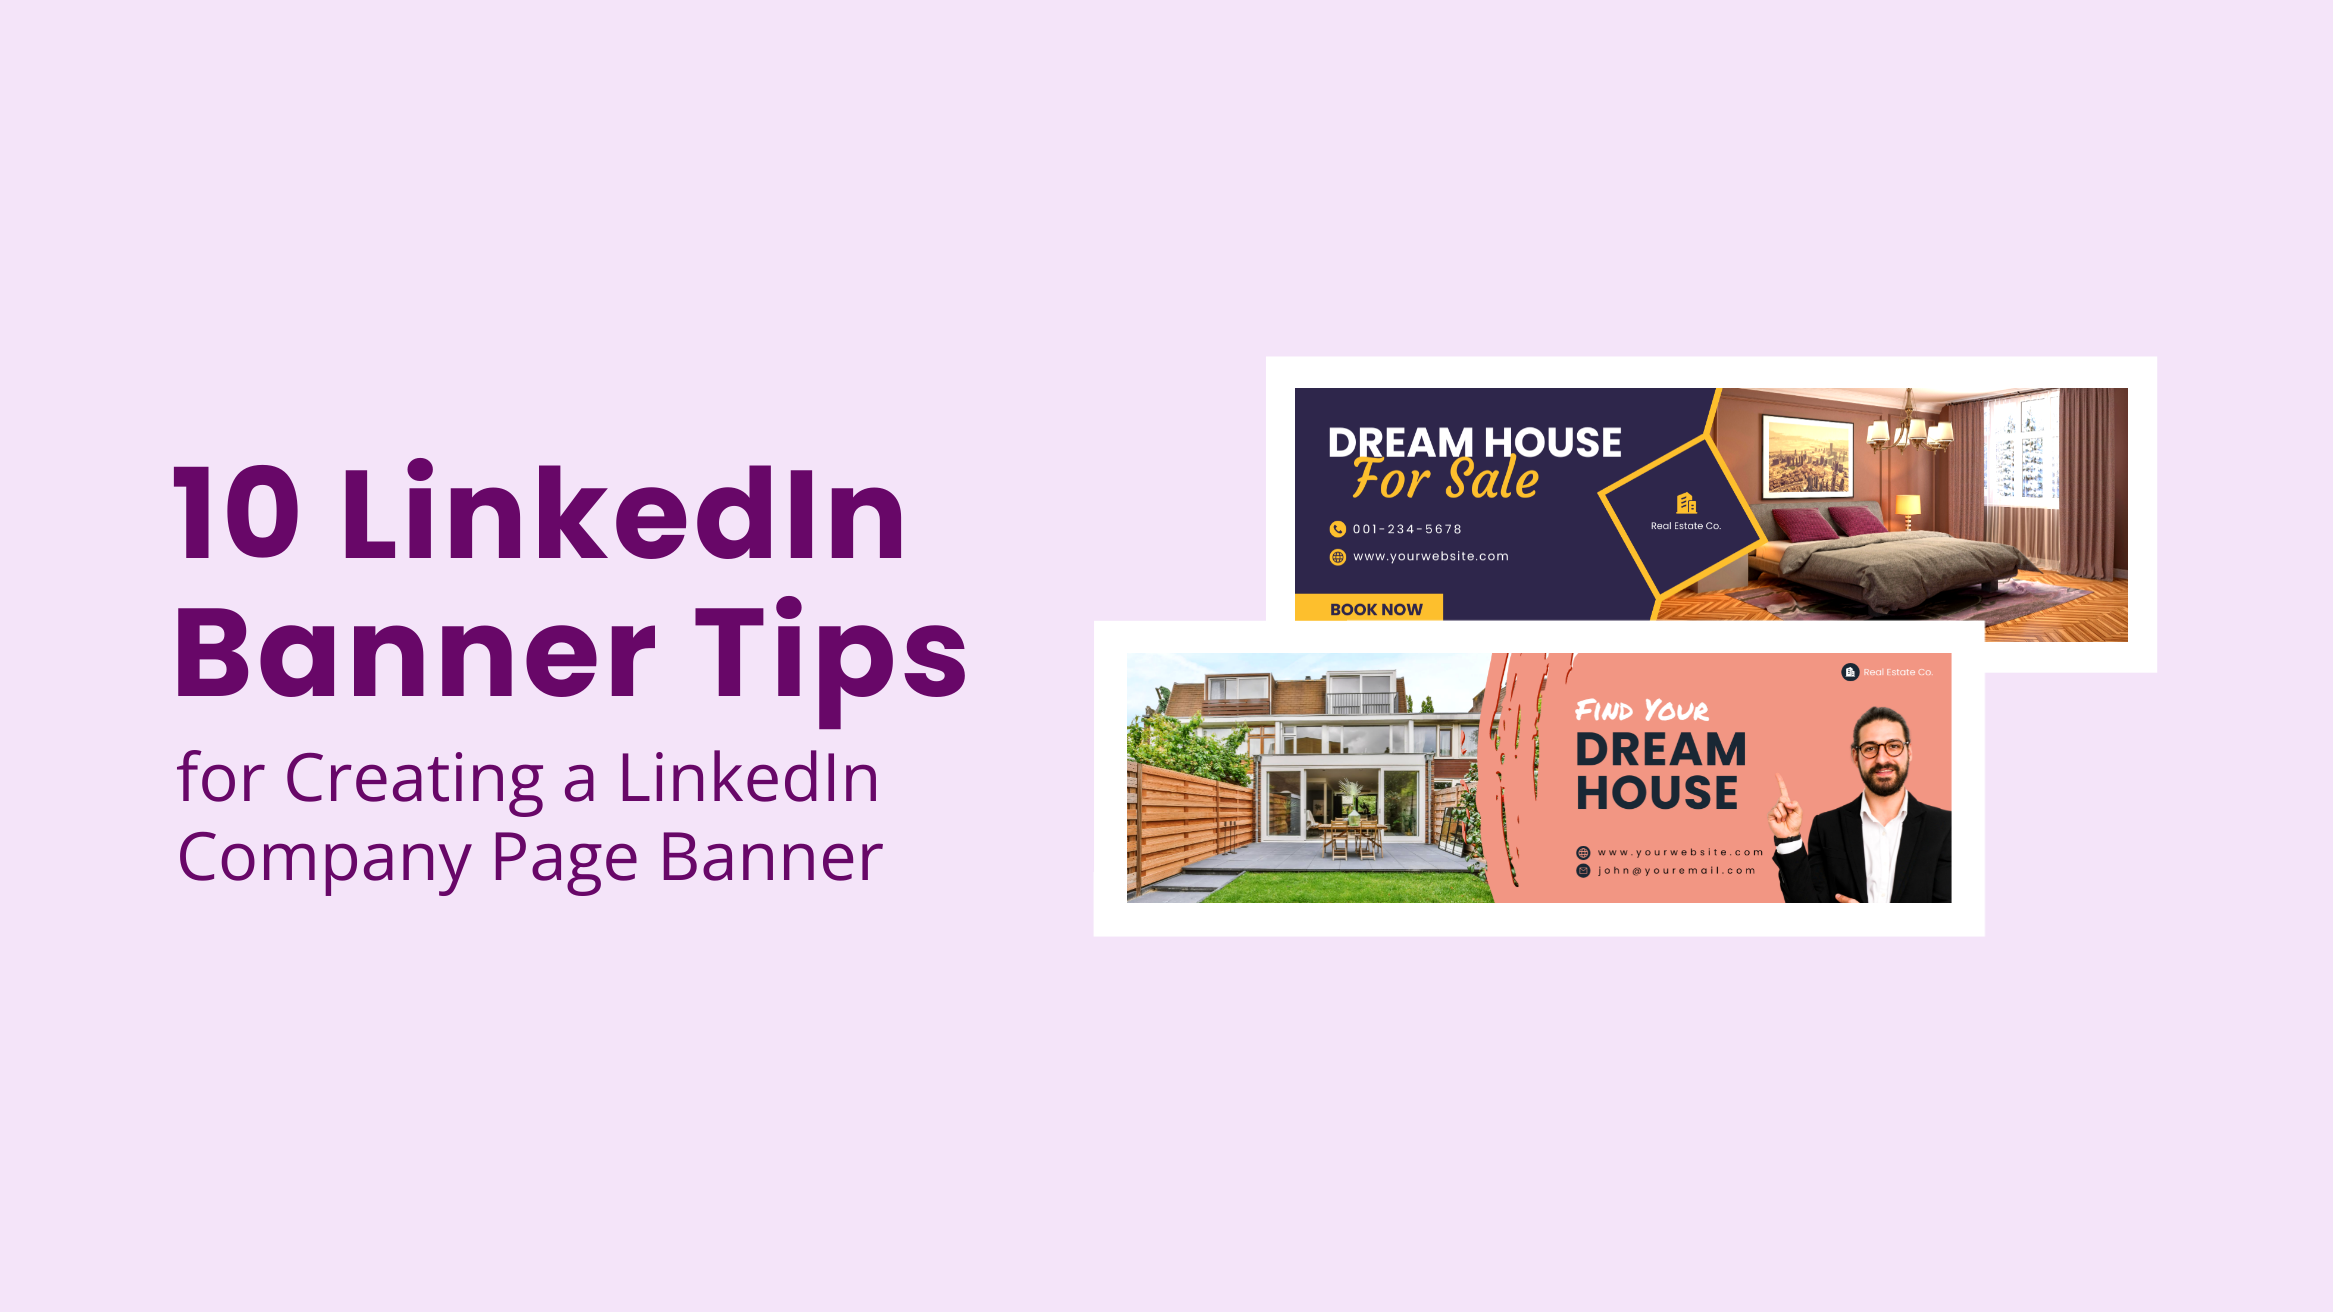 LinkedIn Banner Tips for Creating a LinkedIn Company Page Banner